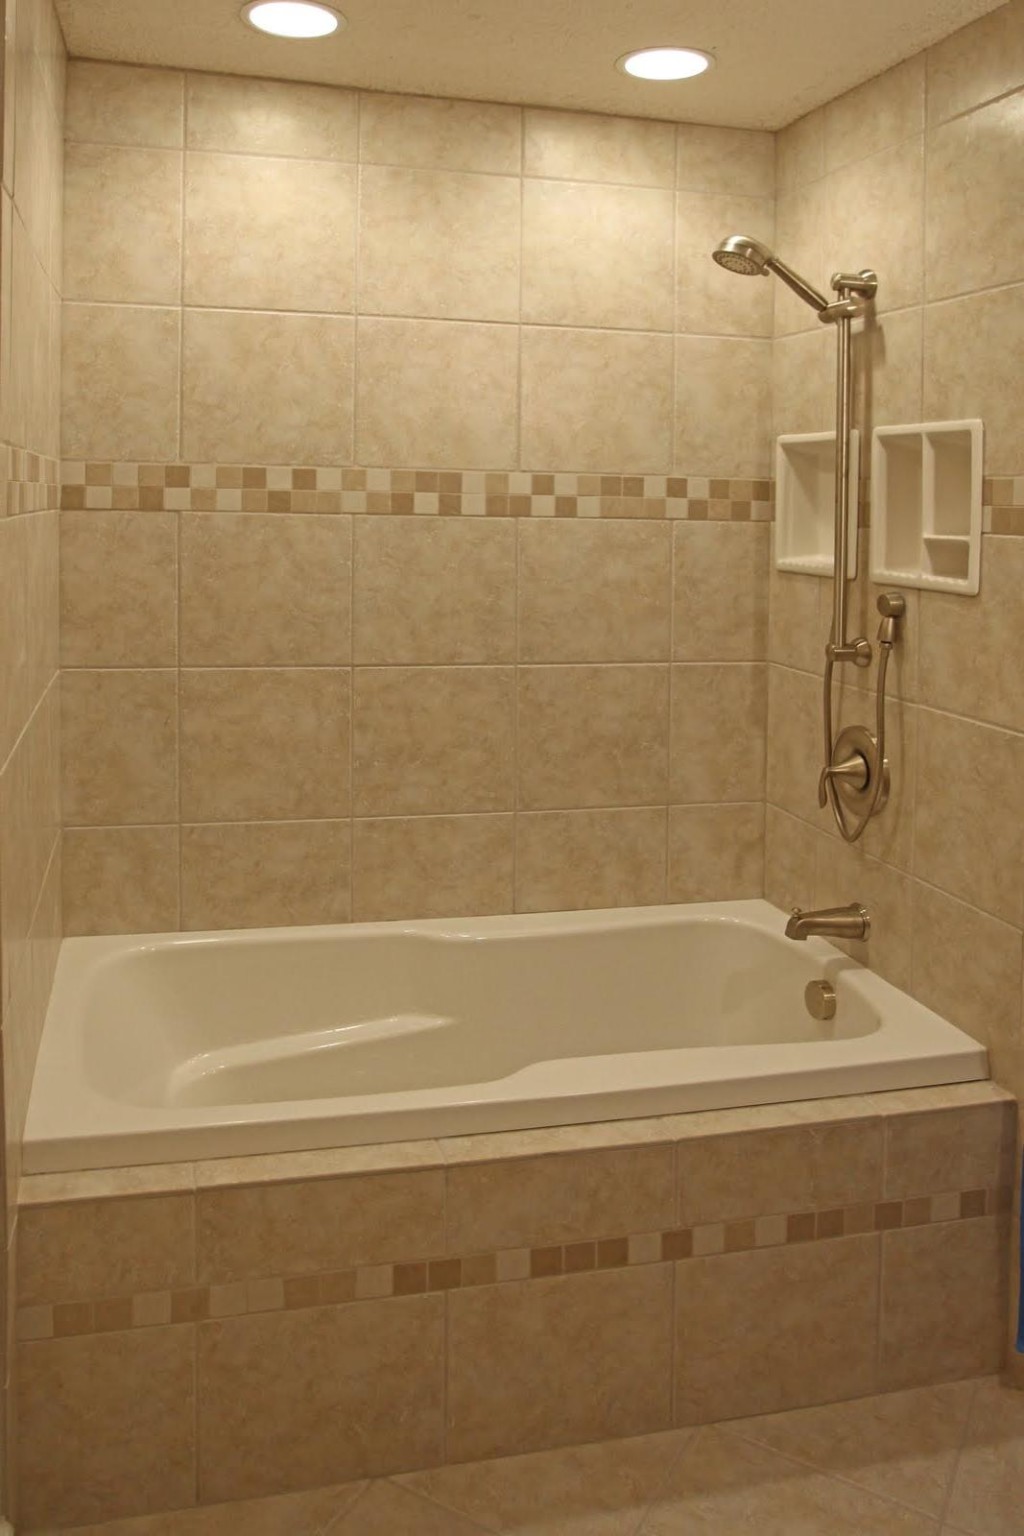 30 Pictures of bathroom wall tile 12x12 2021